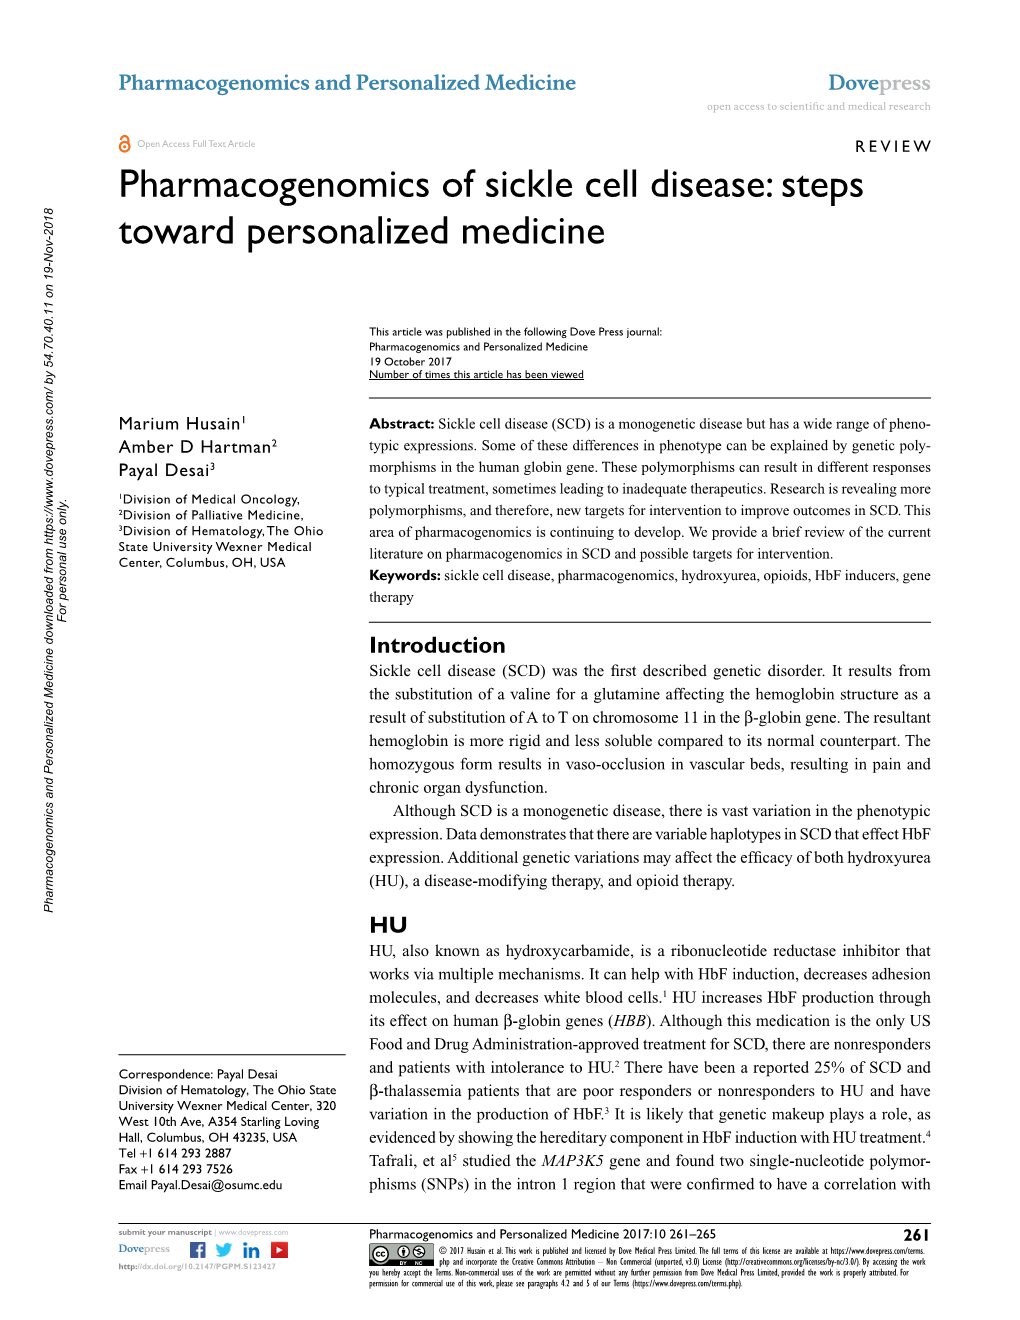 Pharmacogenomics of Sickle Cell Disease Open Access to Scientific and Medical Research DOI